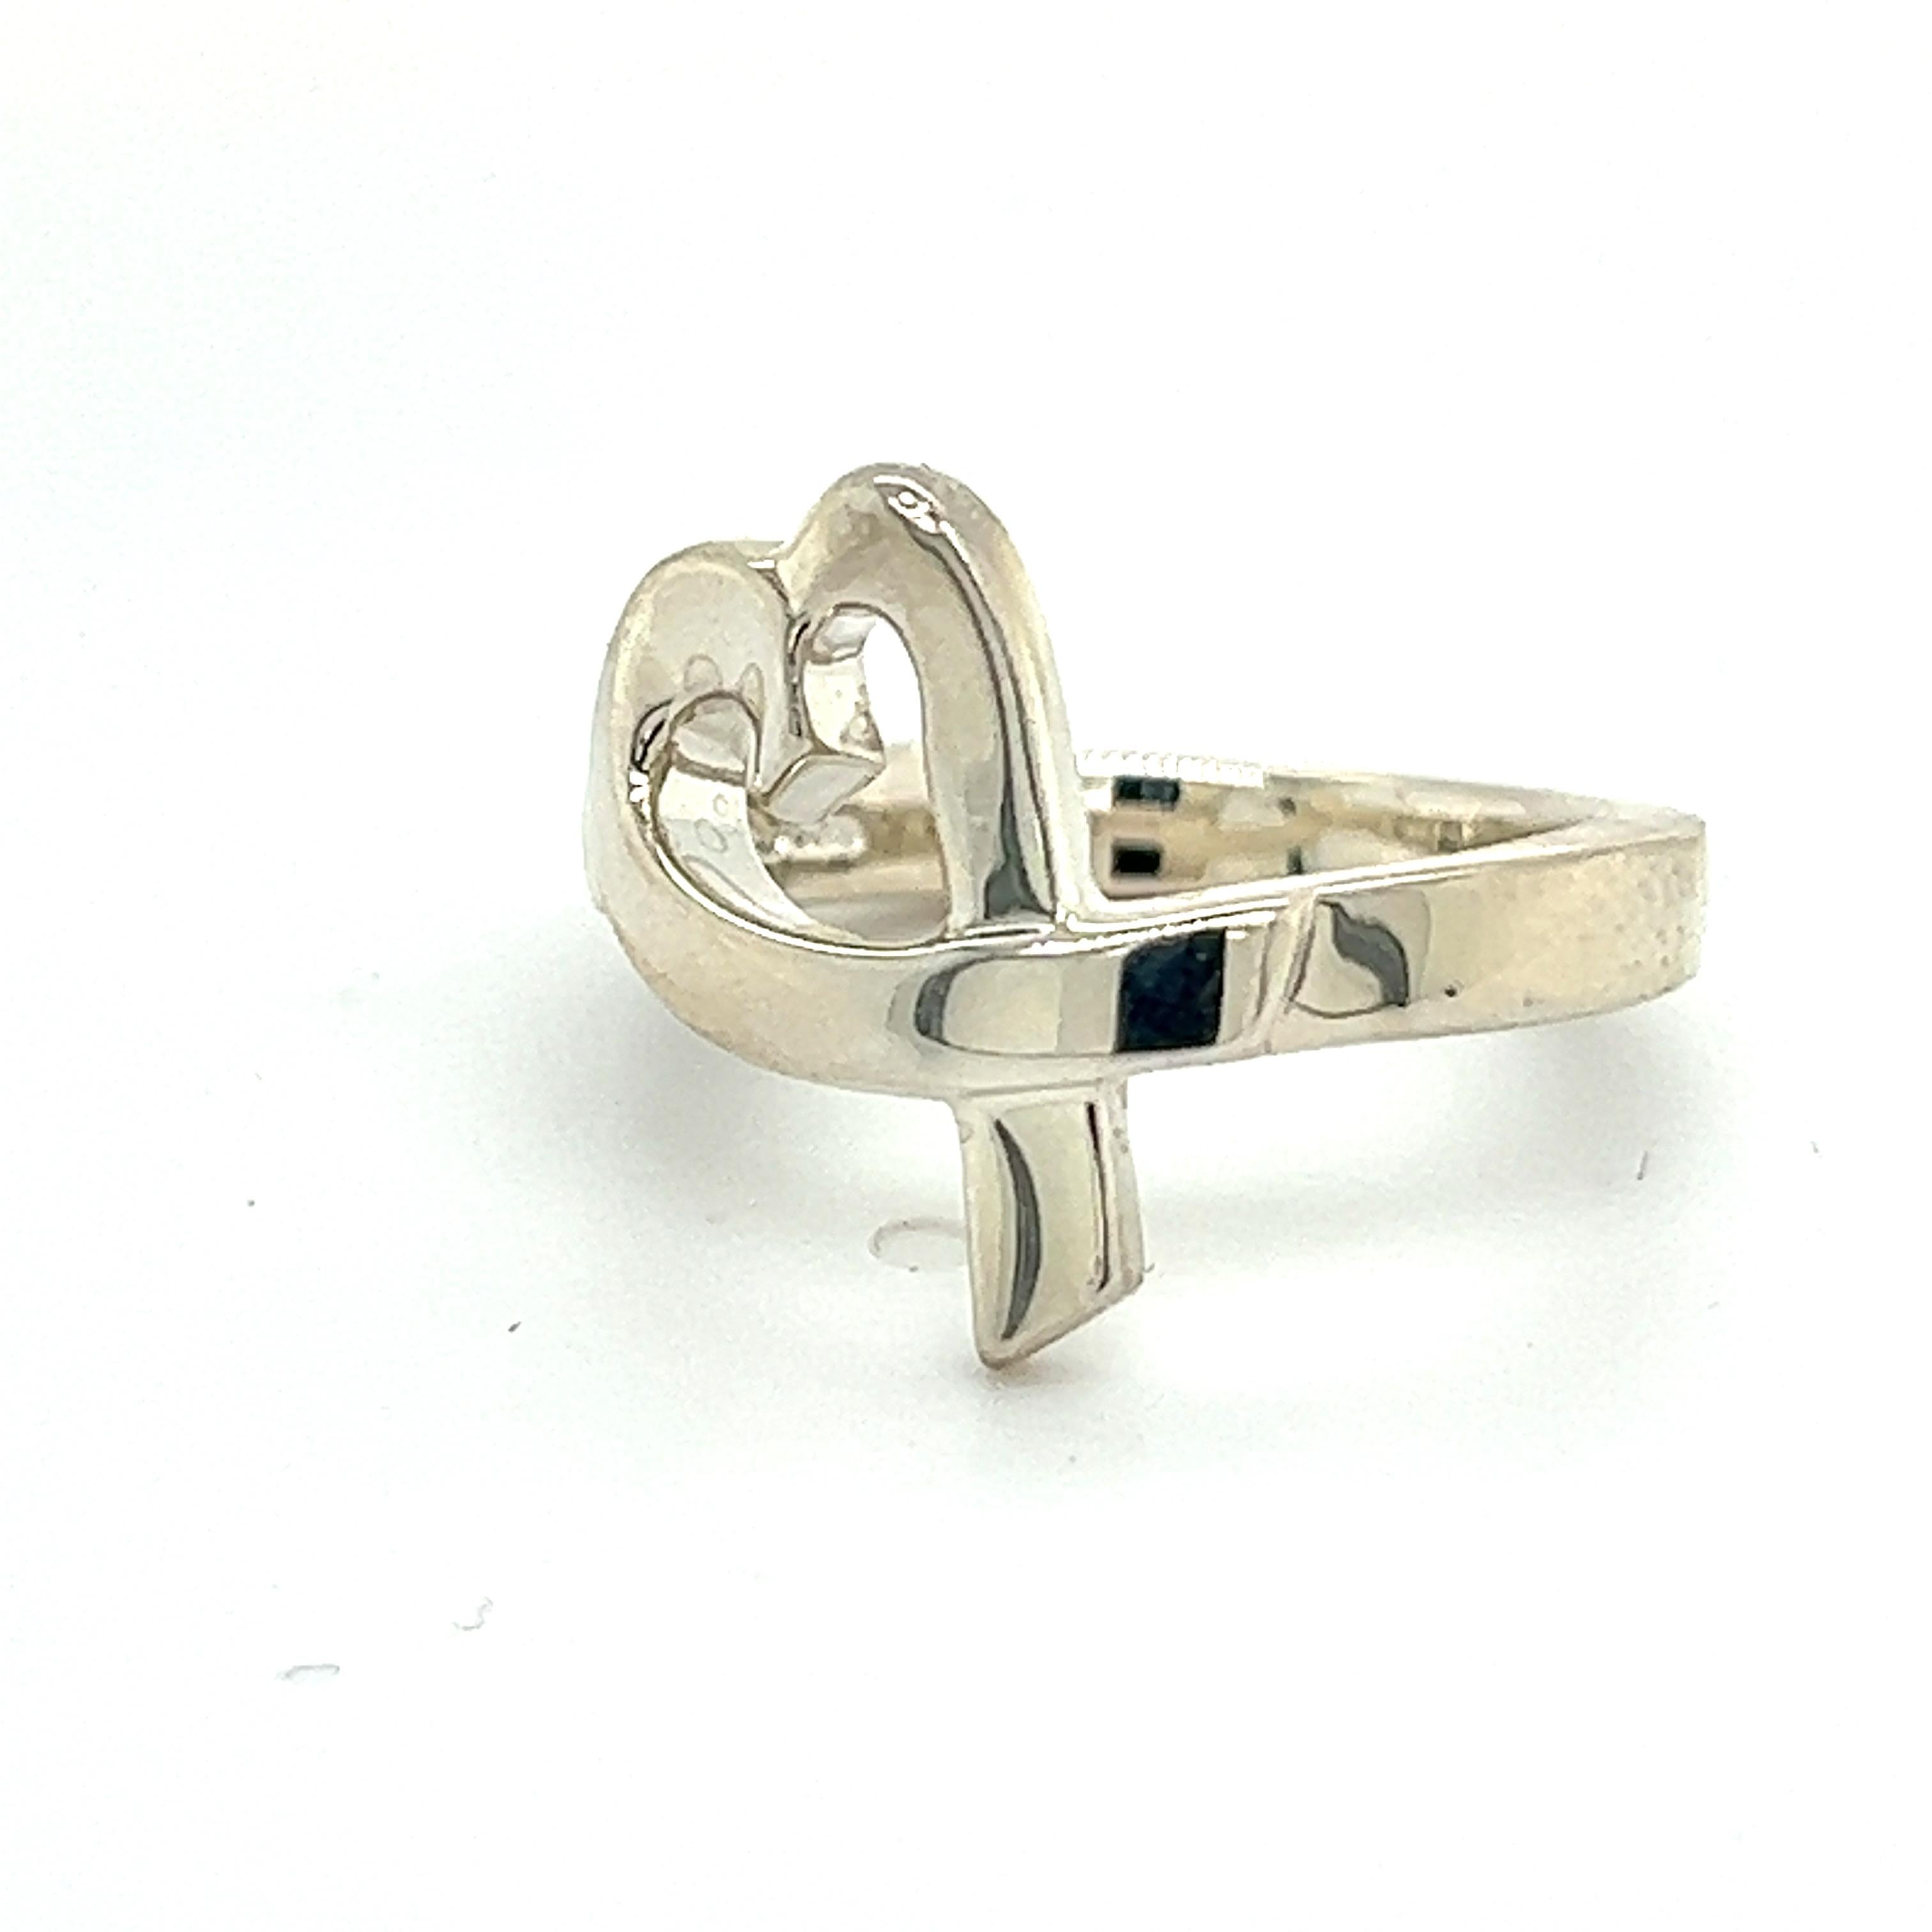 Tiffany & Co Estate Single Loving Heart Ring 6.75 Silver TIF453

TRUSTED SELLER SINCE 2002

PLEASE SEE OUR HUNDREDS OF POSITIVE FEEDBACKS FROM OUR CLIENTS!!

FREE SHIPPING

DETAILS
Style: Loving Heart
Size: 6.75
Metal: Sterling Silver
Weight: 4.35